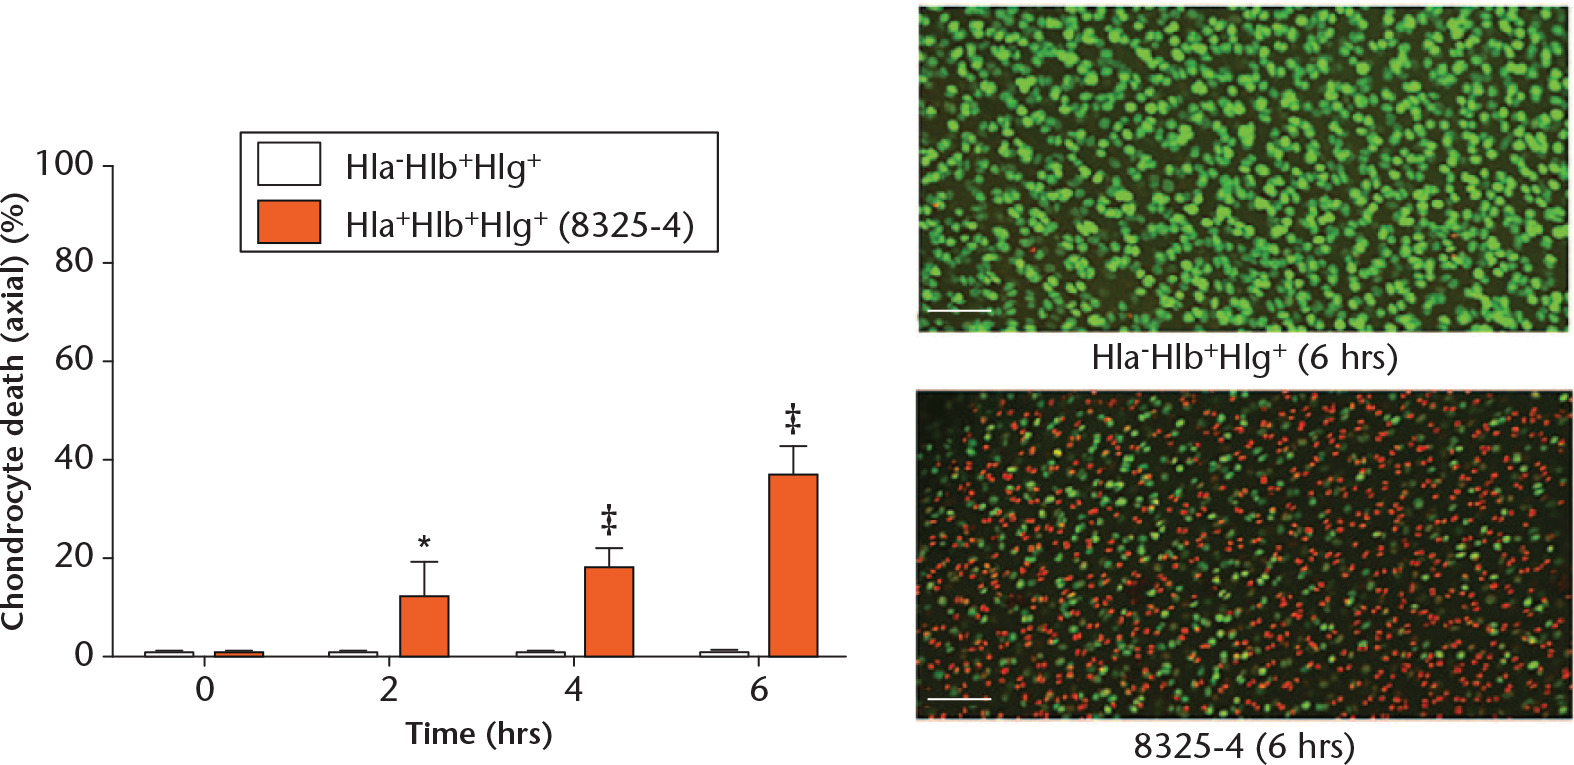 Fig. 5 
            Graph showing that alpha-haemolysin (Hla) alone affected in situ chondrocyte viability. Osteochondral explants cultured with Hla-Hlb+Hlg+ supernatant were compared with those cultured with 8325-4 supernatant. The only difference between the two culture supernatants was the presence or absence of Hla. There was significant chondrocyte death at each timepoint in explants exposed to the 8325-4 supernatant in comparison with those exposed to the Hla-Hlb+Hlg+ supernatant (N = 4 (n = 8); *p < 0.05; ‡p < 0.001 by unpaired Student’s two-tailed t-test). The confocal laser-scanning microscopy images display the influence of Hla on in situ chondrocyte viability.
          